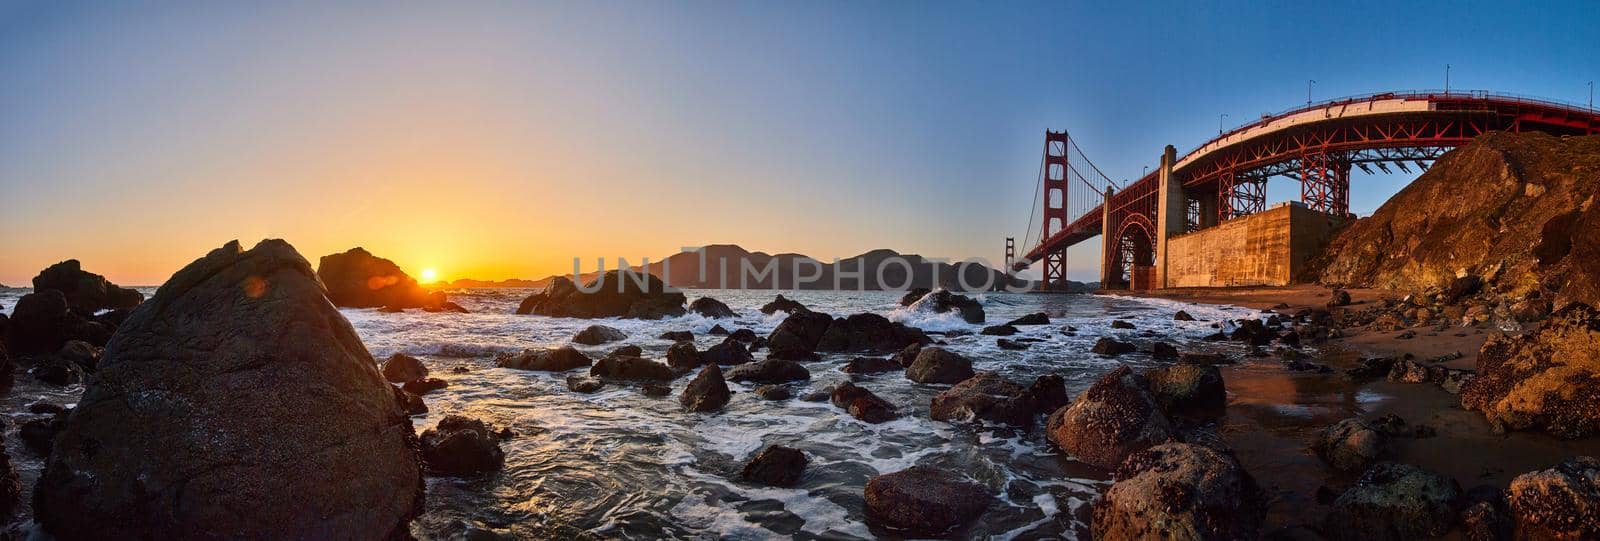 Image of Stunning panorama of Golden Gate Bridge on ocean coast with rocks and sunset